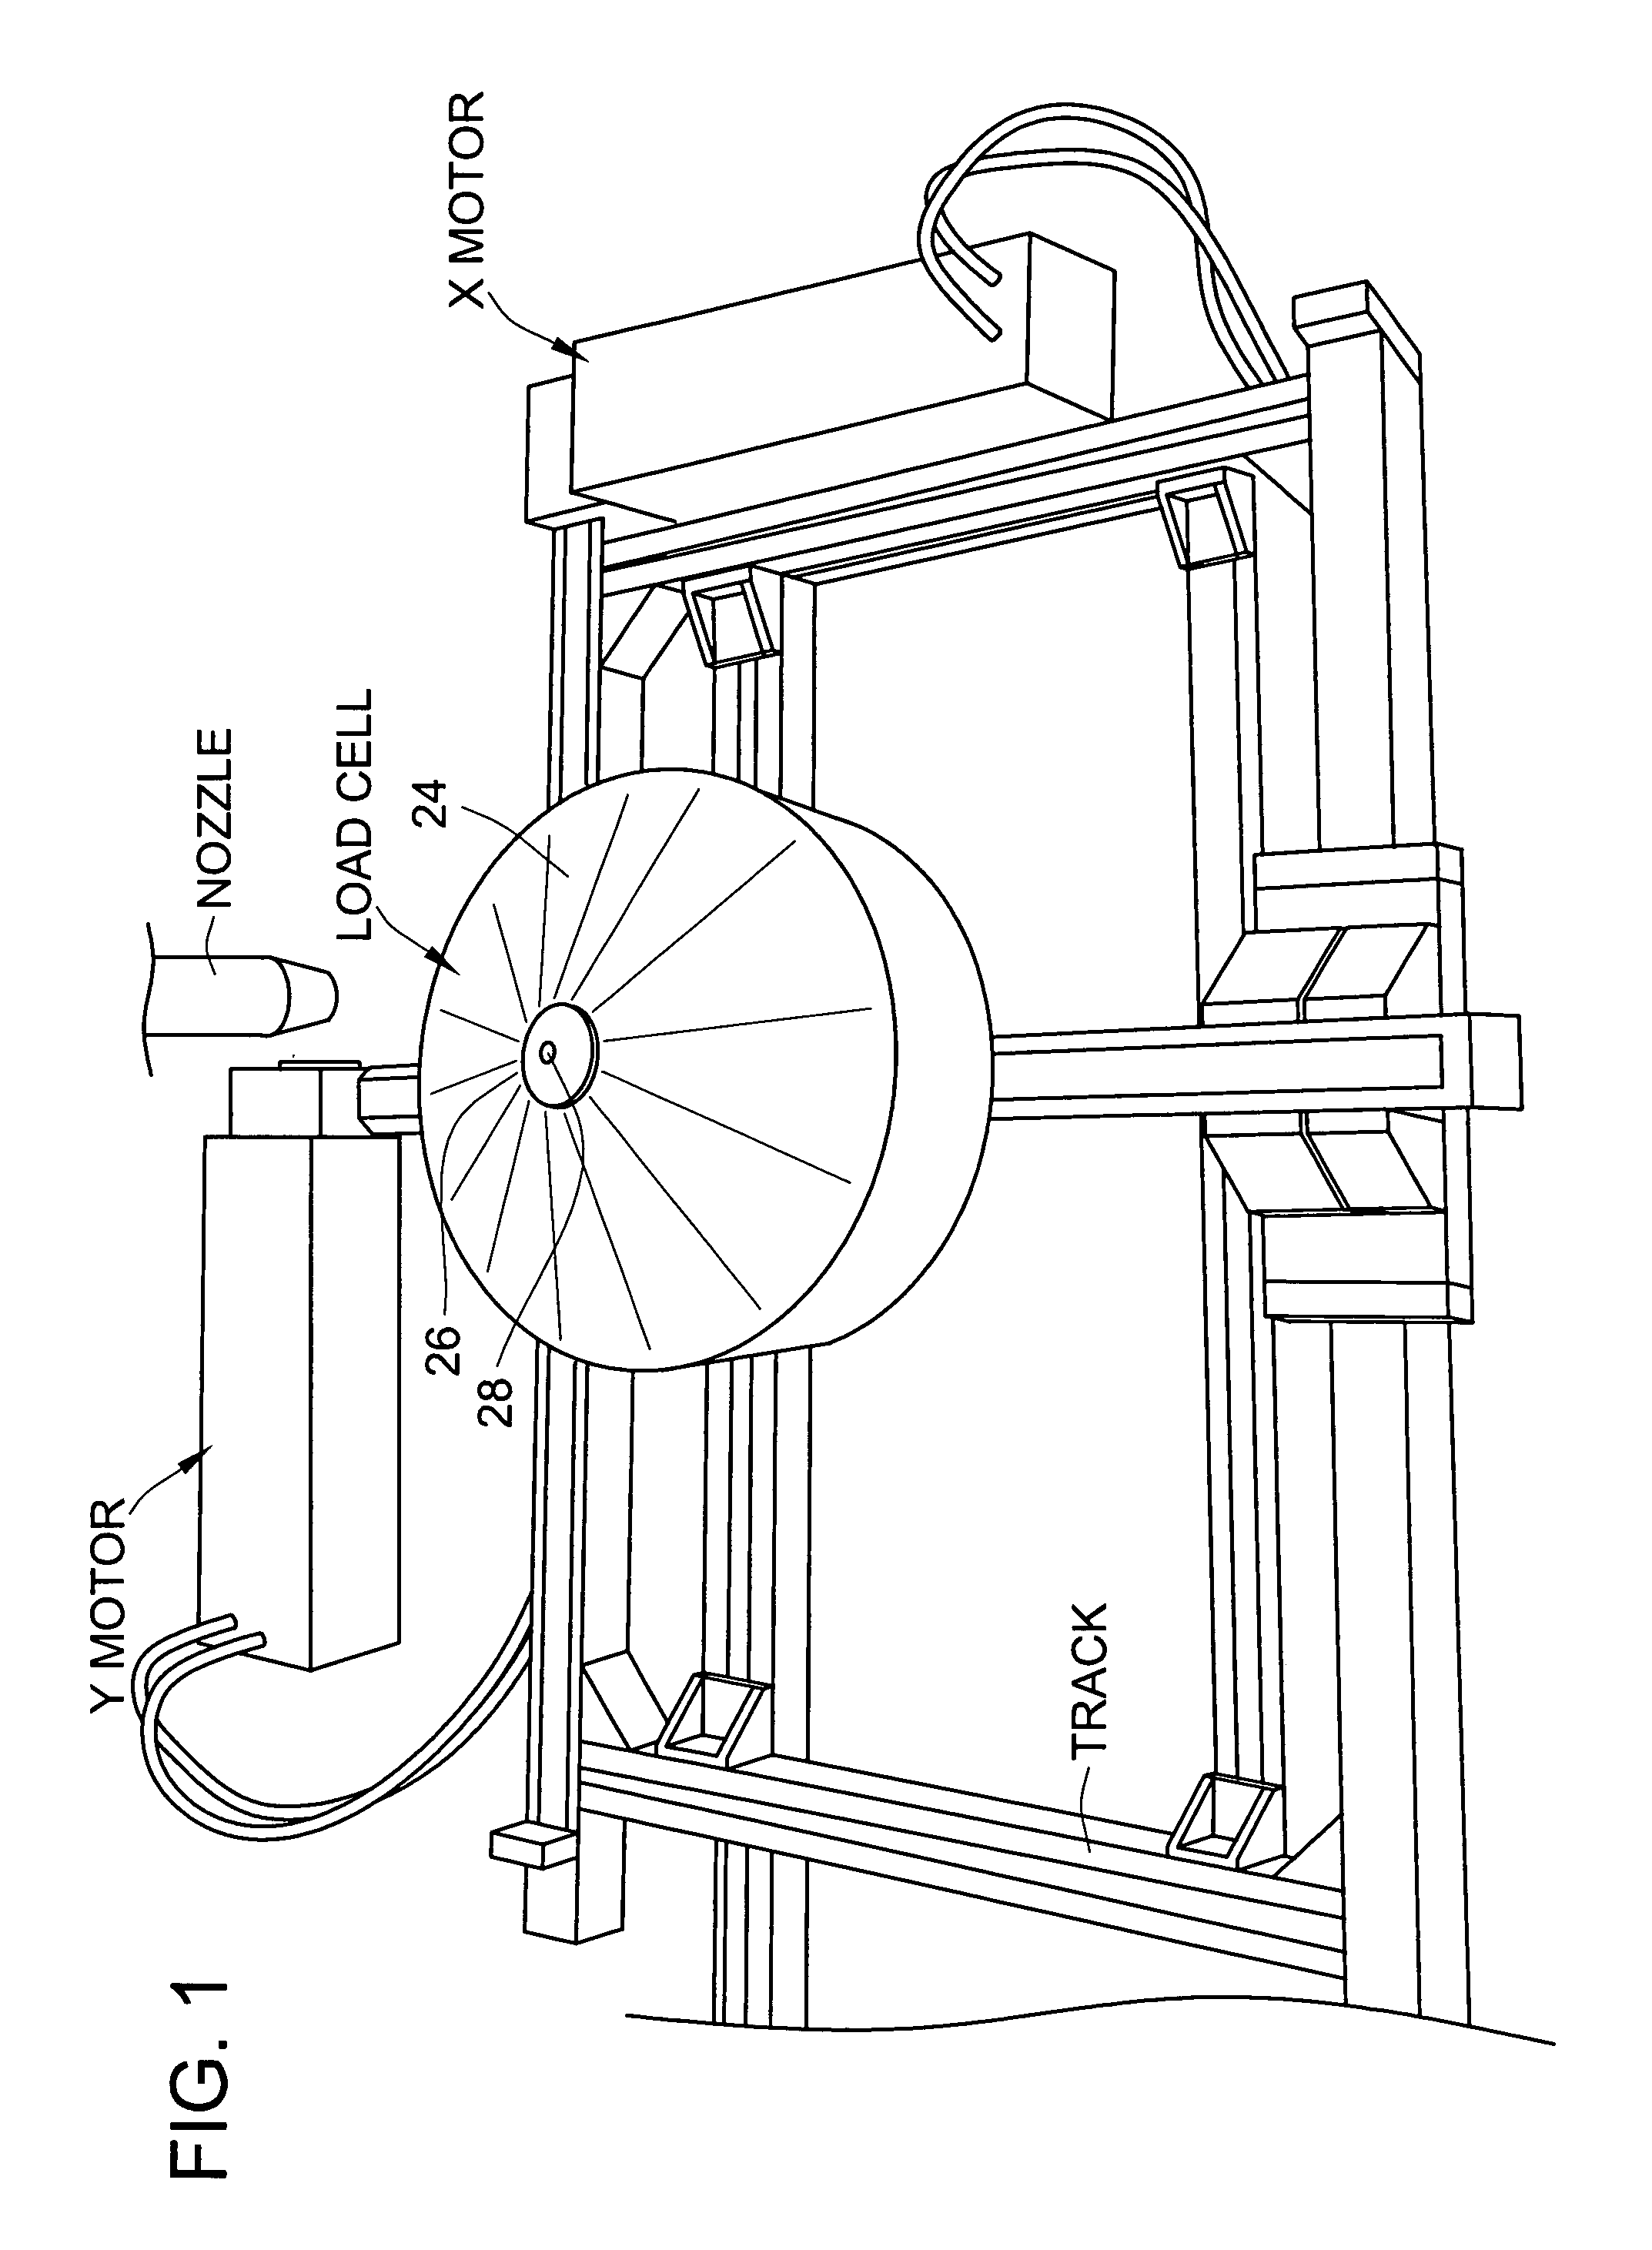 Apparatus and method for measuring characteristics of fluid spray patterns